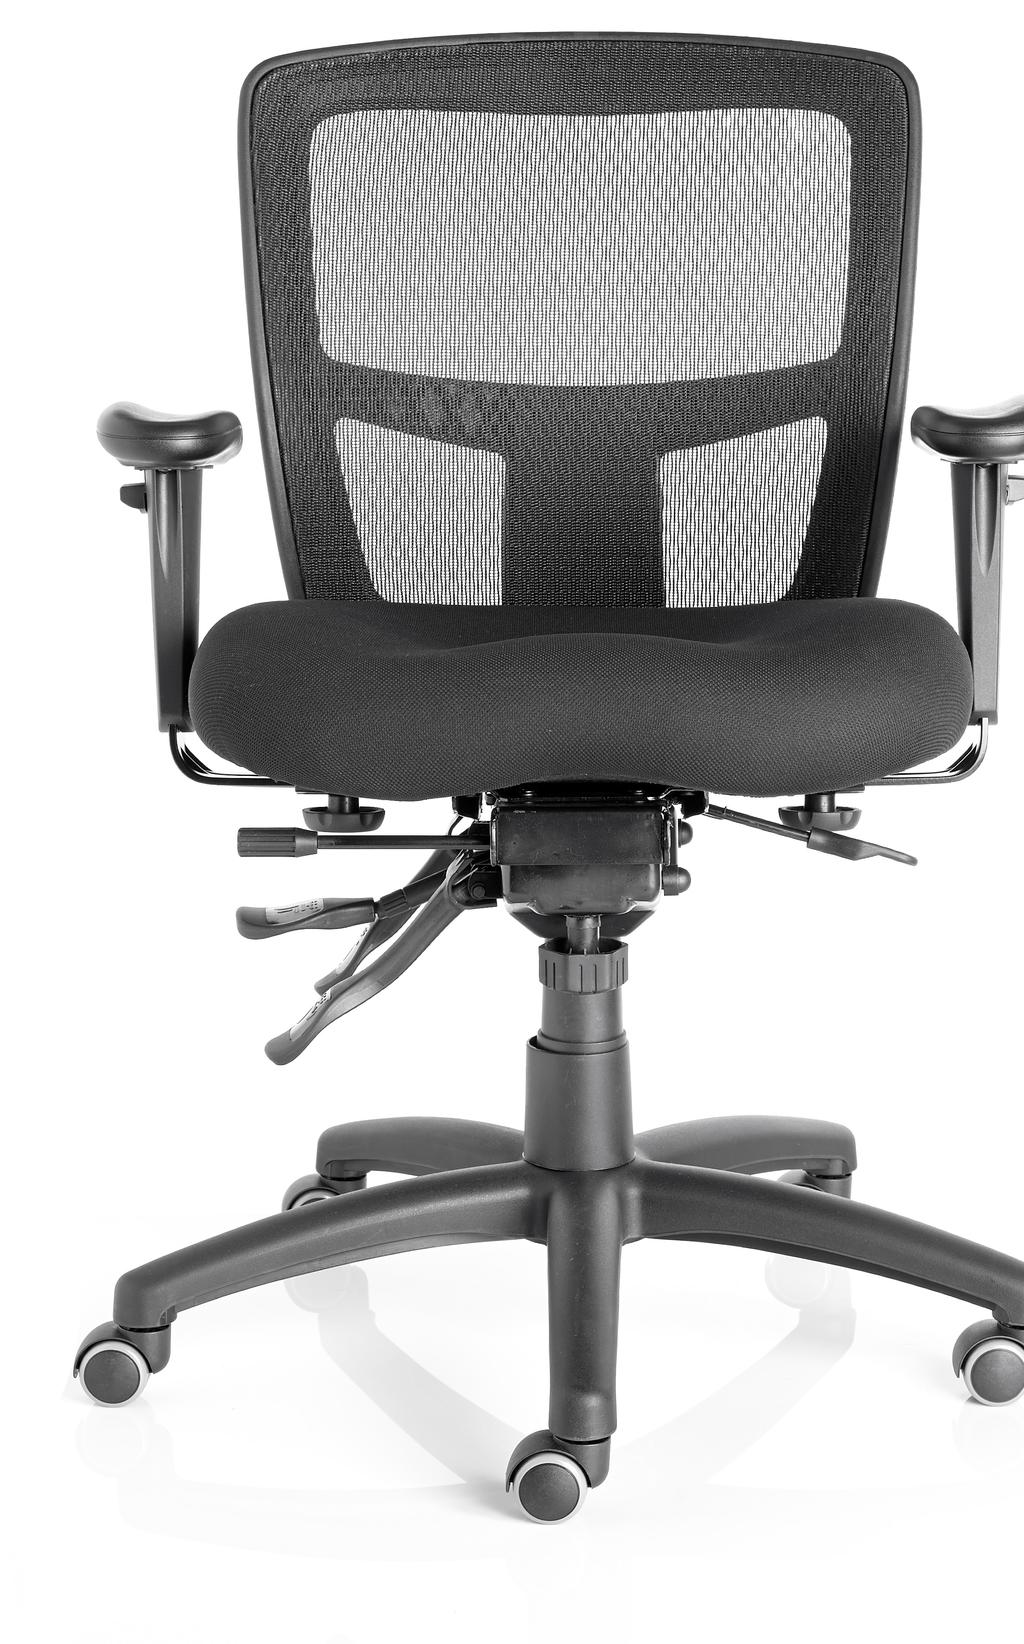 TASK SEATING ZONE IN THE (COMFORT) ZONE FUNCTIONS Pneumatic lift Swivel action Infinitely locking back and seat tilts 2-way adjustable arms Black nylon base